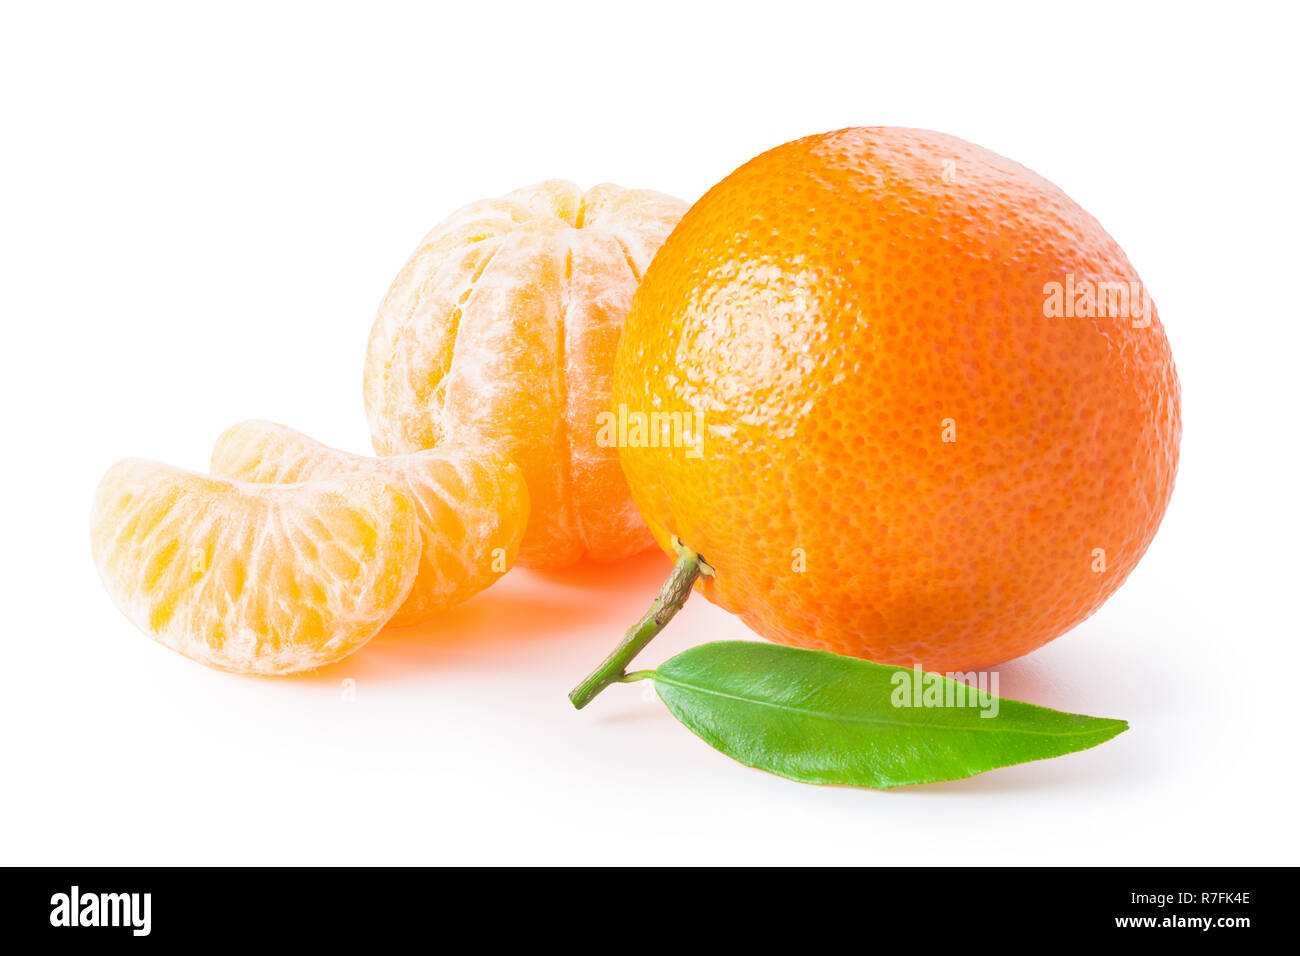 Tangerines, clementines bag on white Stock Photo by ©imaginative 4720193